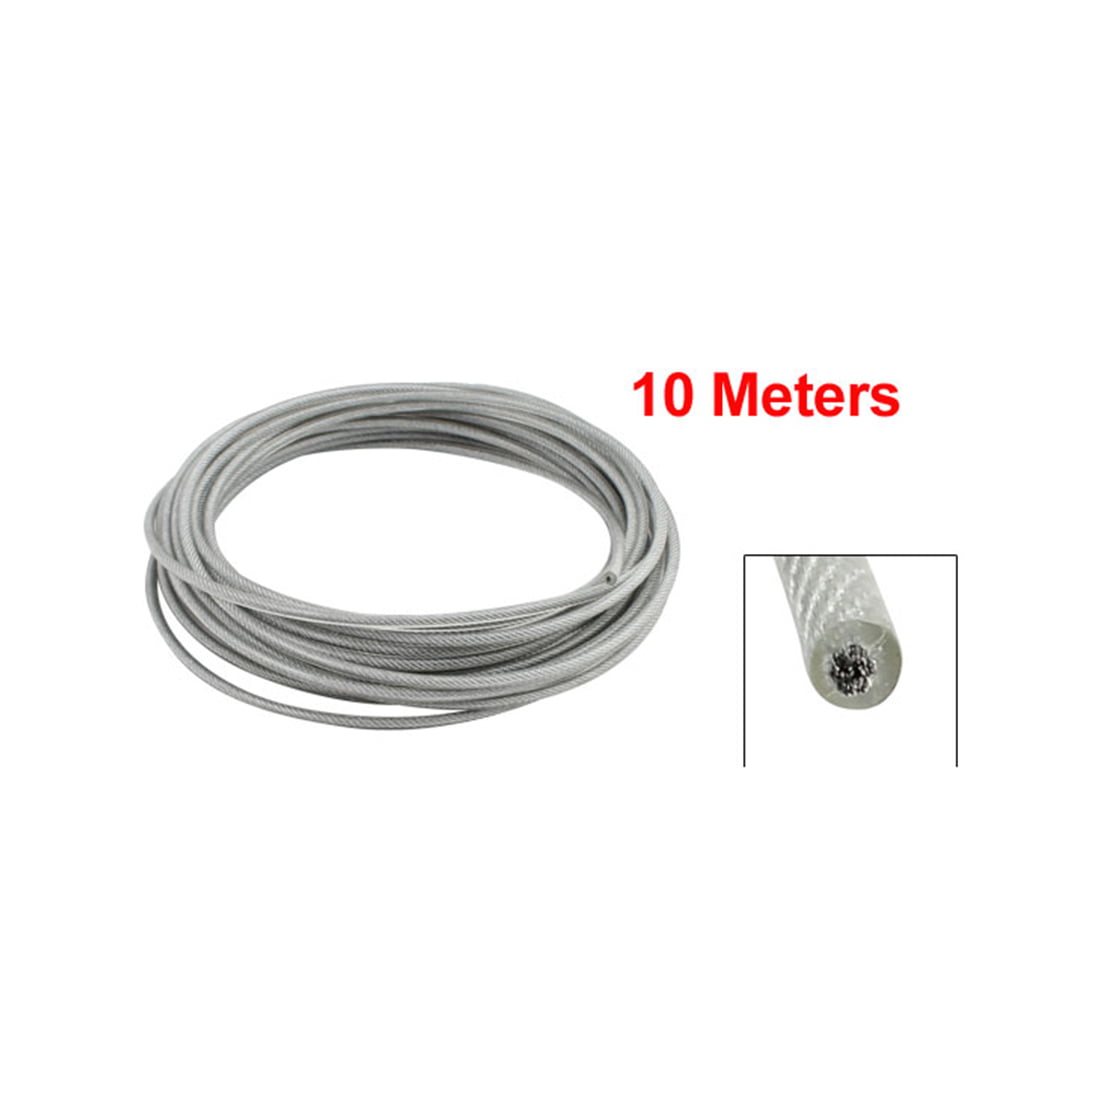 4mm PVC coated galvanized steel CABLE stranded plastic plastic metal wire rope 